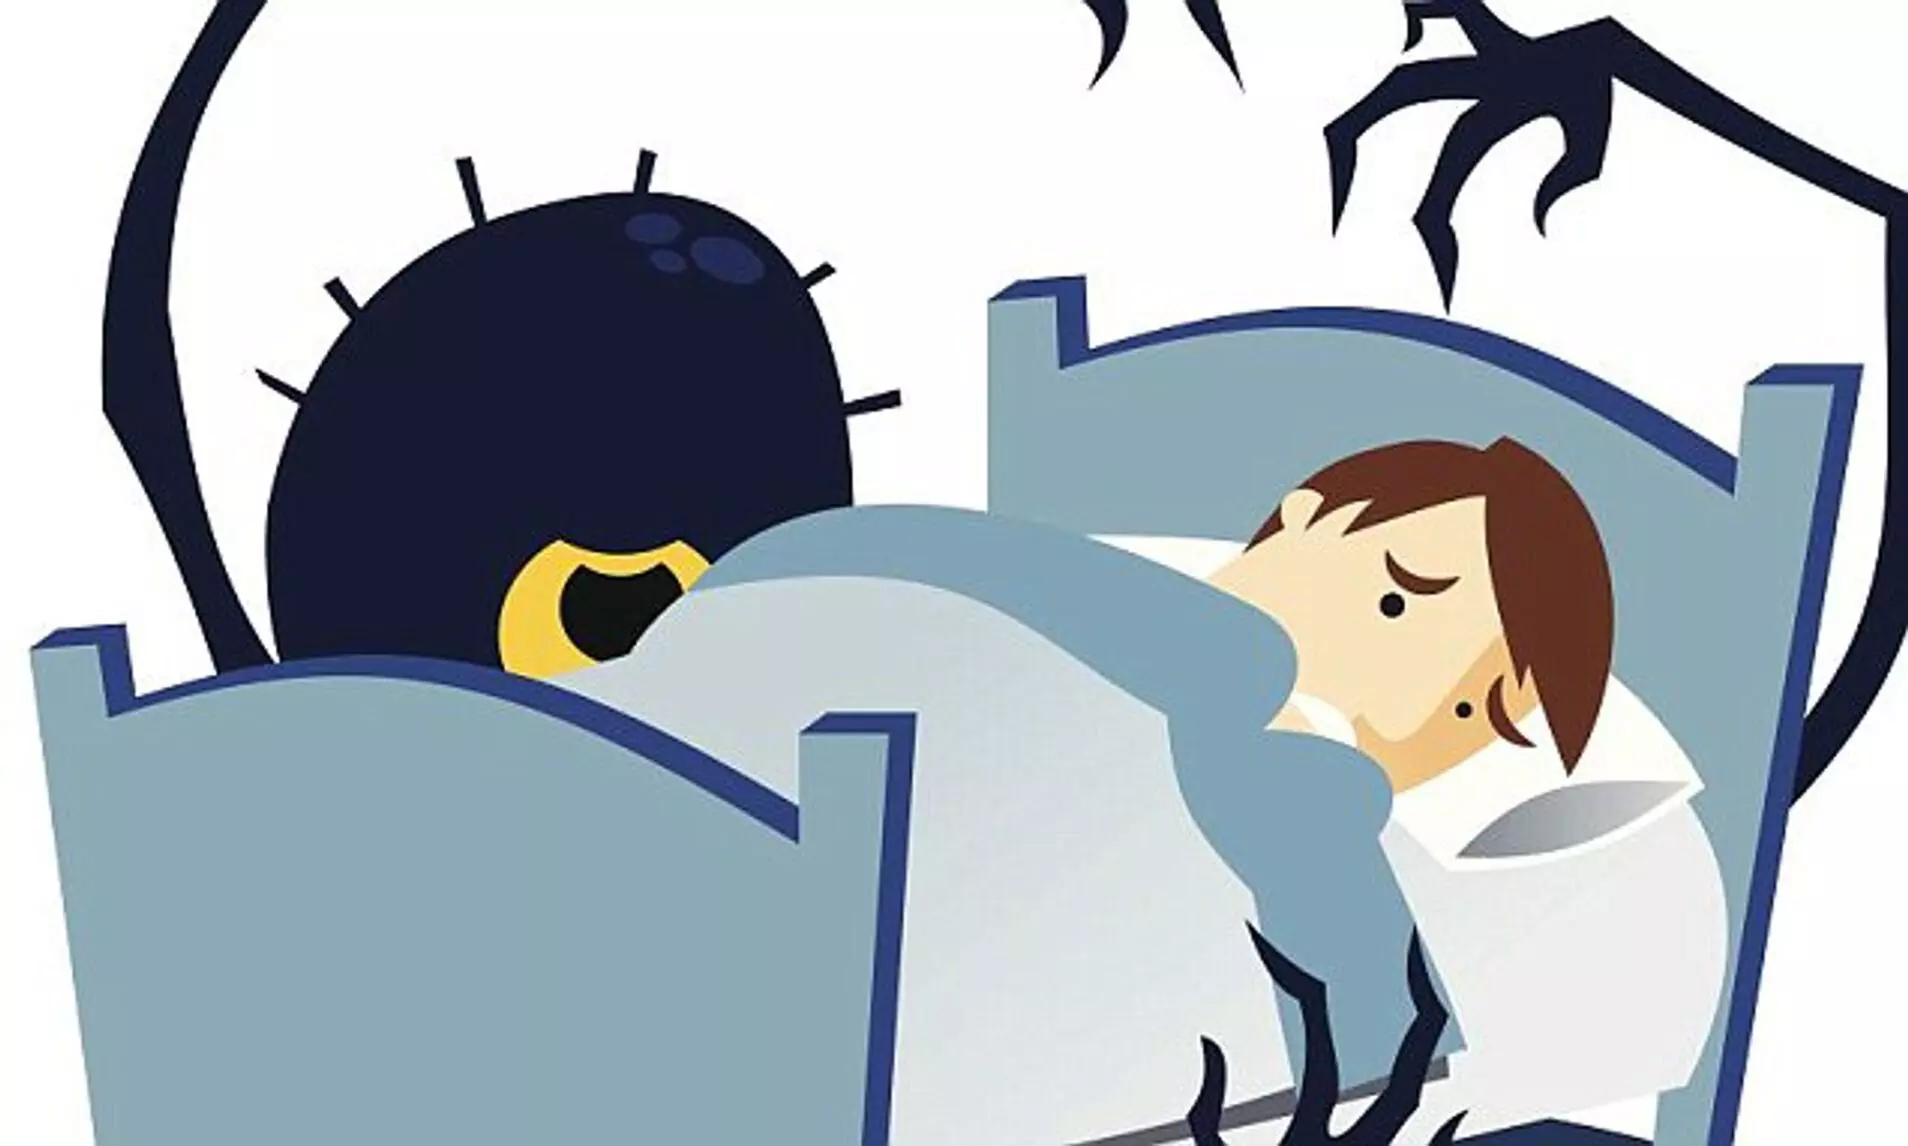 Heart patients with weekly nightmares more likely to have depression, sleep disorders: Study